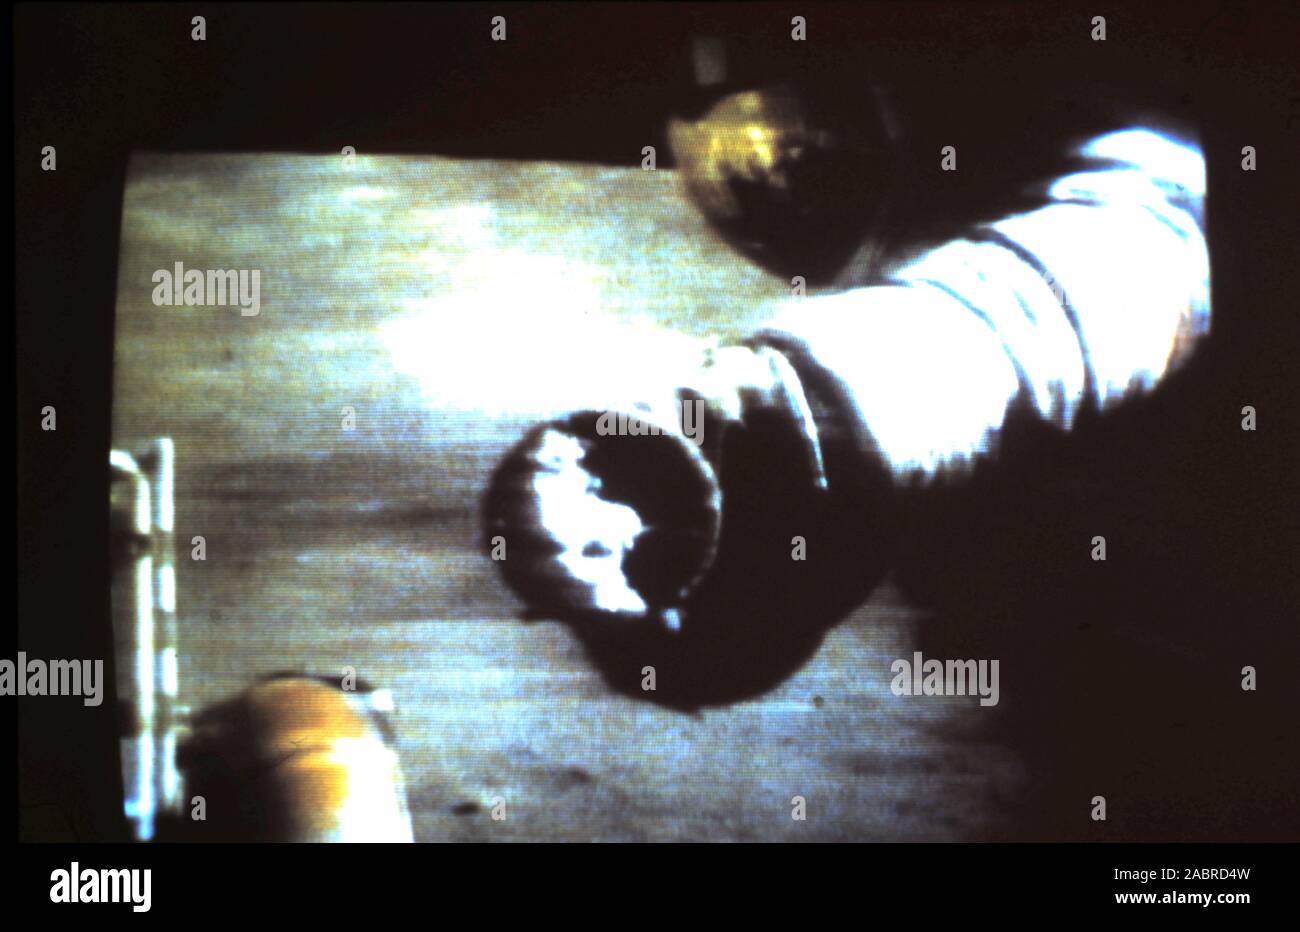 Teleclip - Apollo Mission yet to be identified - taken directly from color TV screen during live broadcast in the UK - 1969-72 - *Please note - as soon as we identify this photograph we shall amend this description.  If you can identify the image to a particular Apollo Moon landing, we would appreciate your assistance. Stock Photo